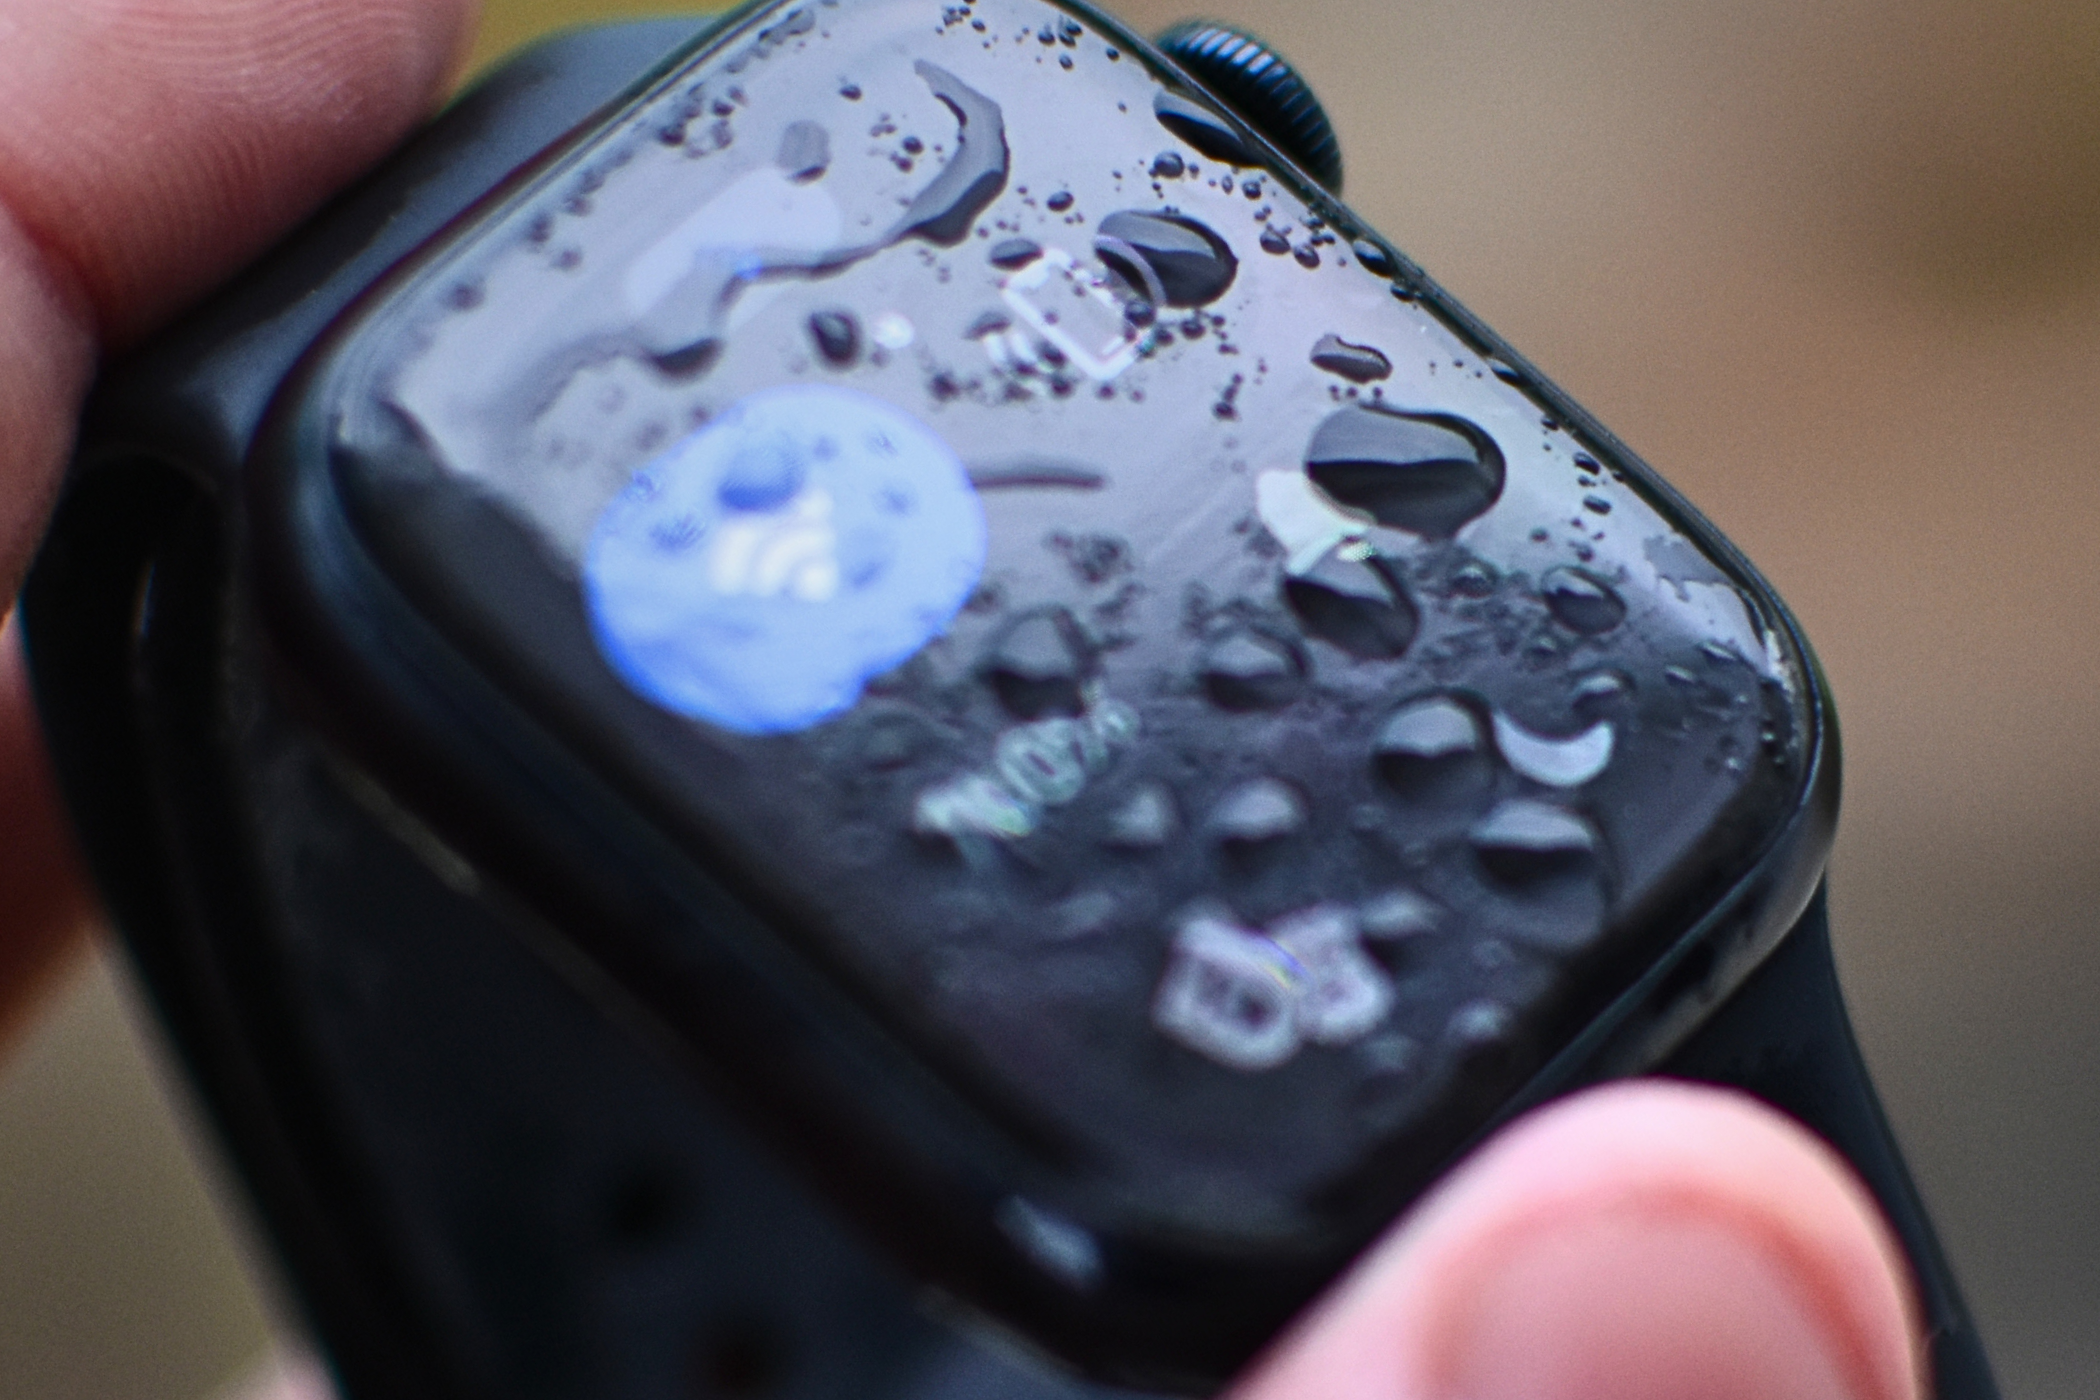 Apple Watch Series 8 with water droplets over the screen.